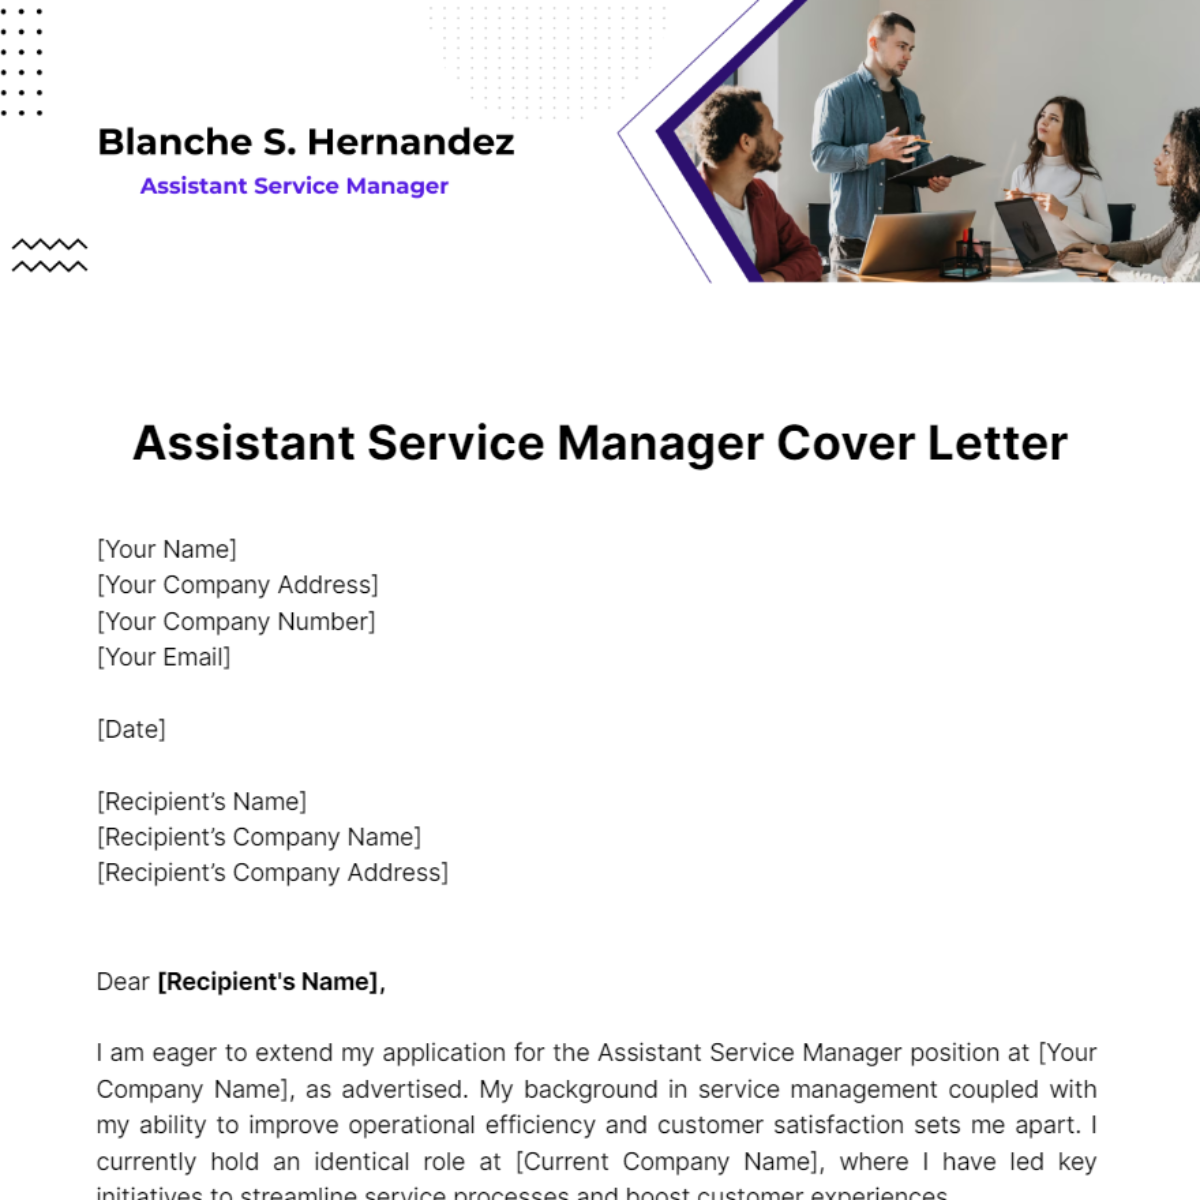 Assistant Service Manager Cover Letter Template